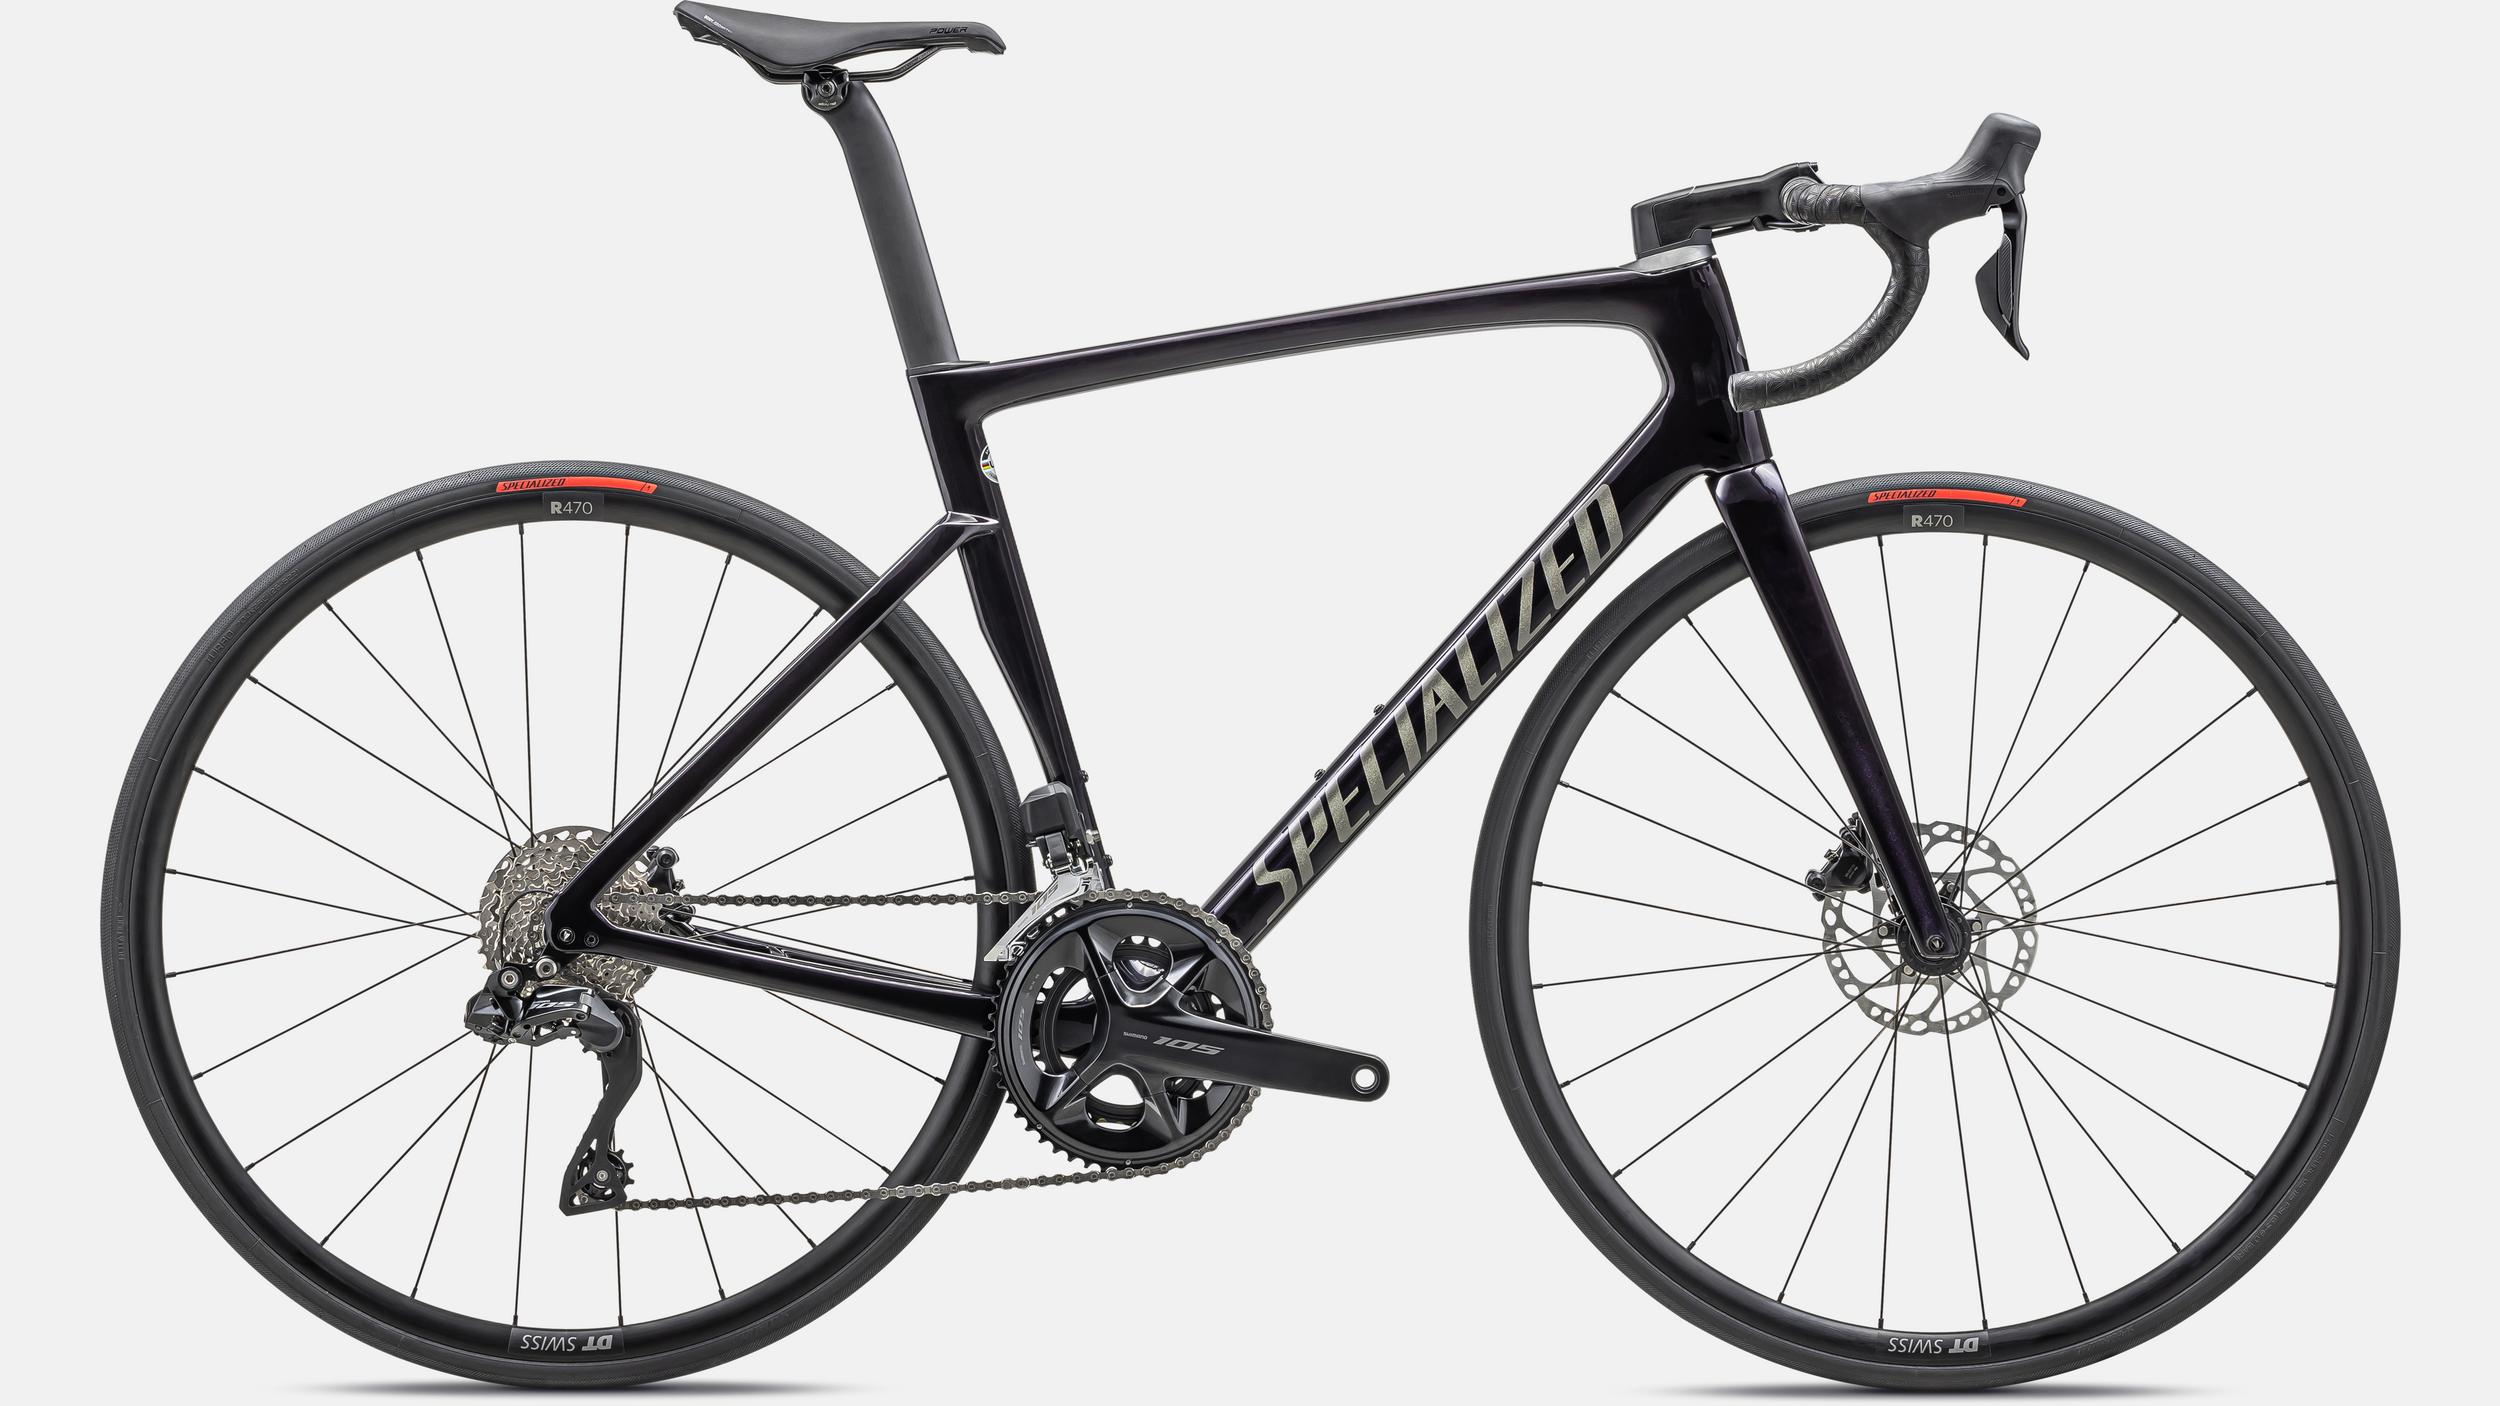 Paint for 2023 Specialized Tarmac SL7 Comp Shimano 105 Di2 - Gloss Metallic Midnight Shadow